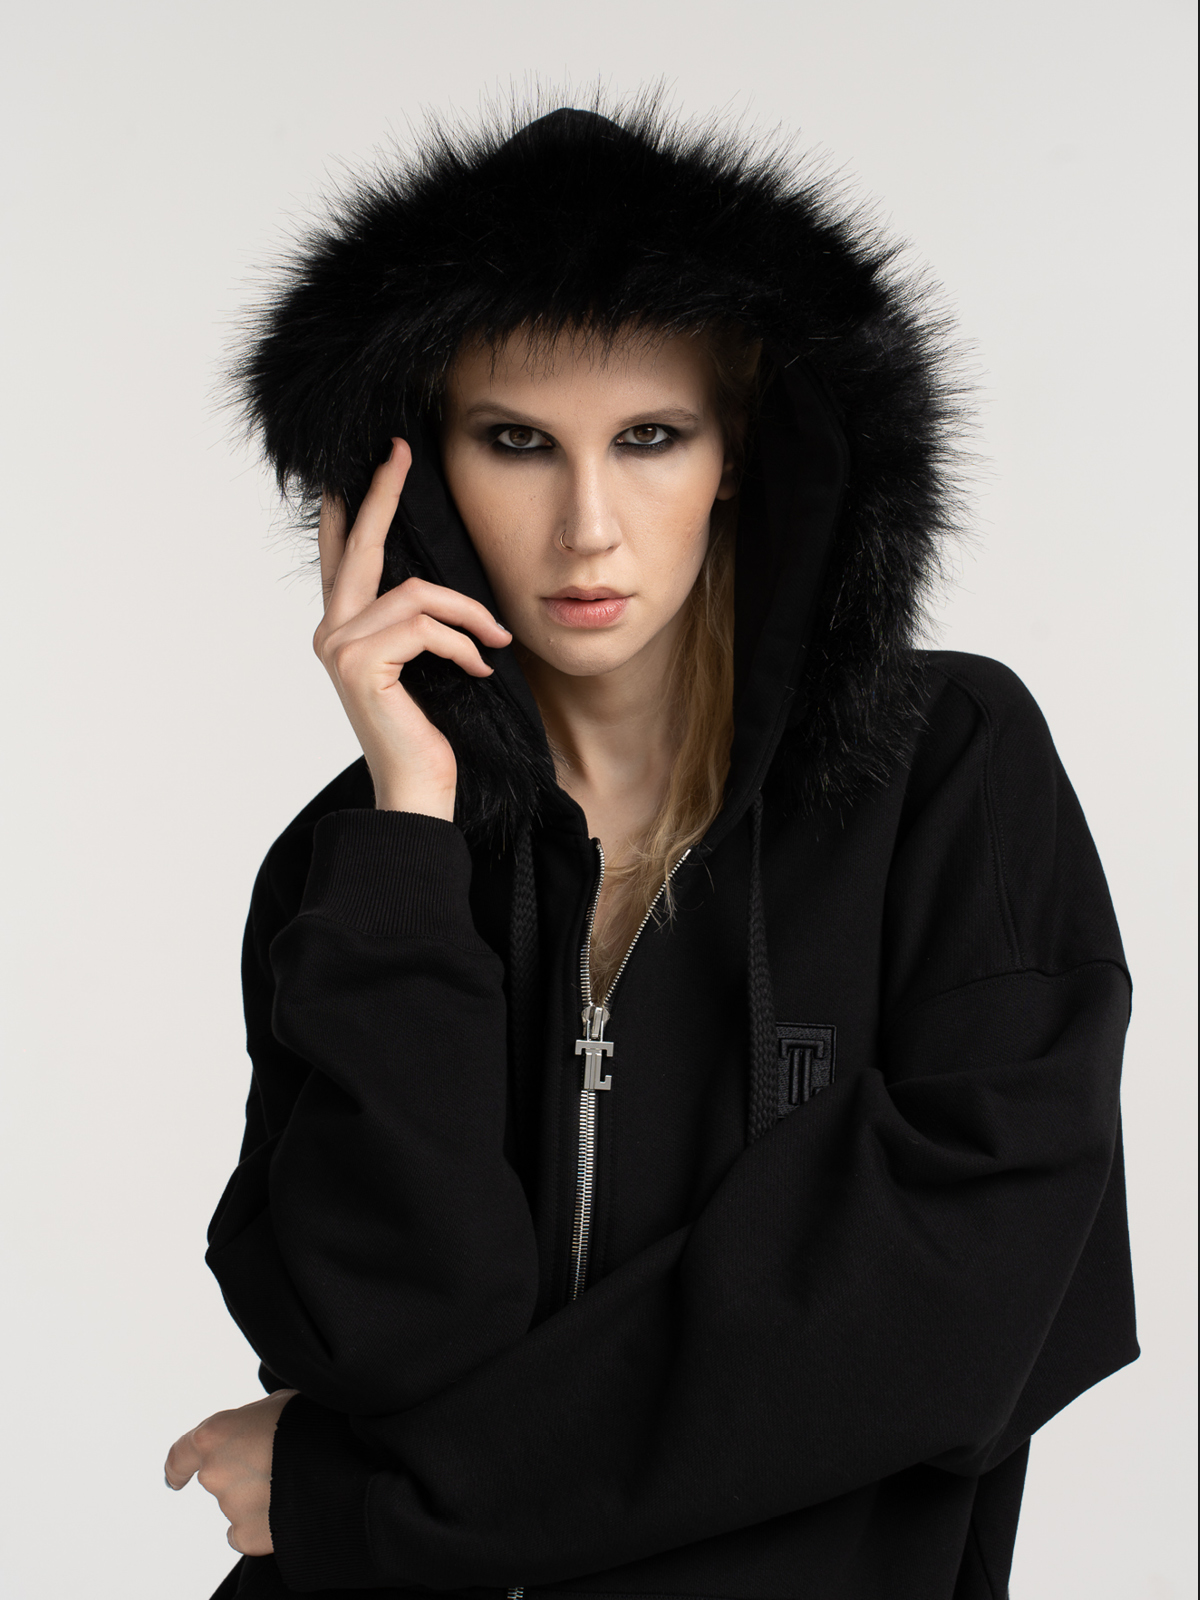 Hoodie jacket with zipper and eco-fur